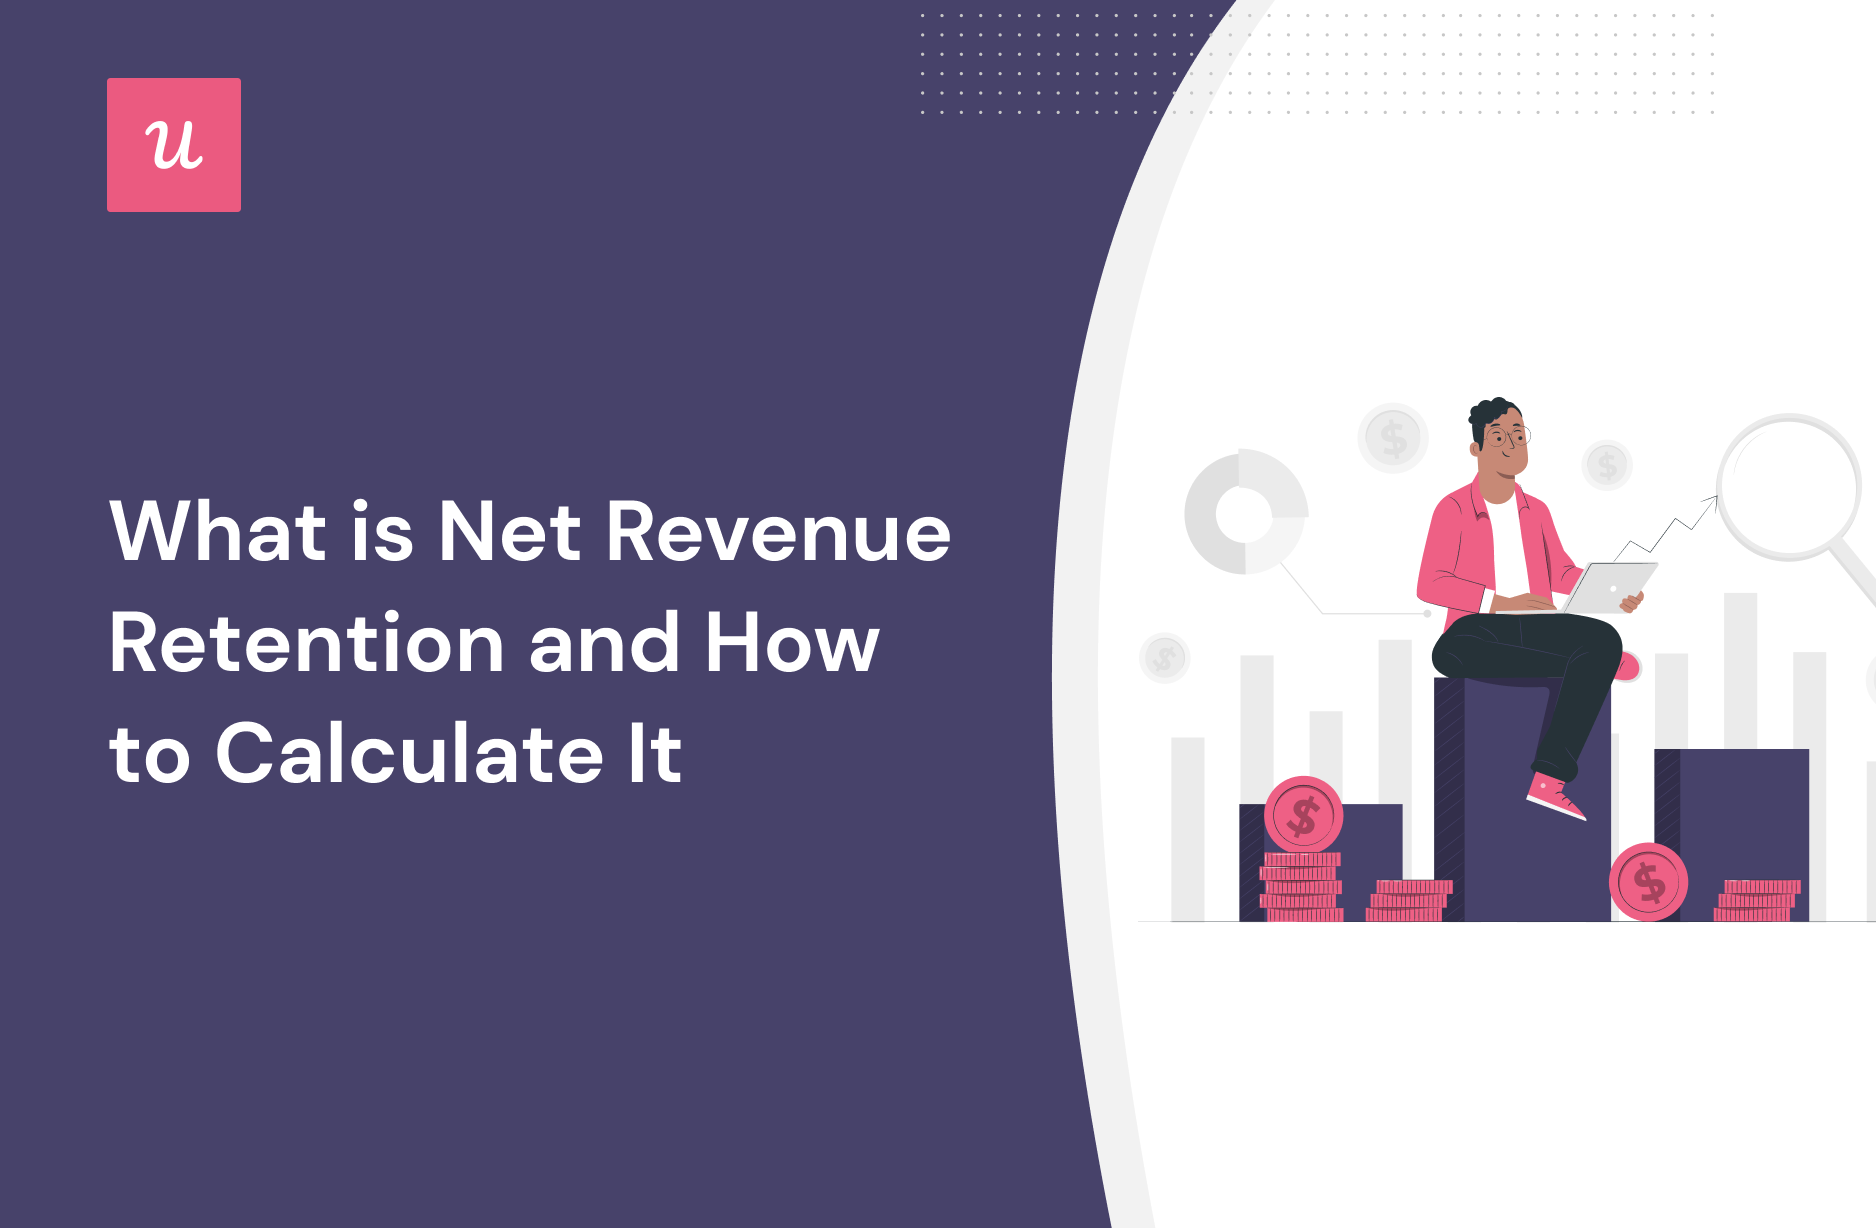 What is Net Revenue Retention and How to Calculate It